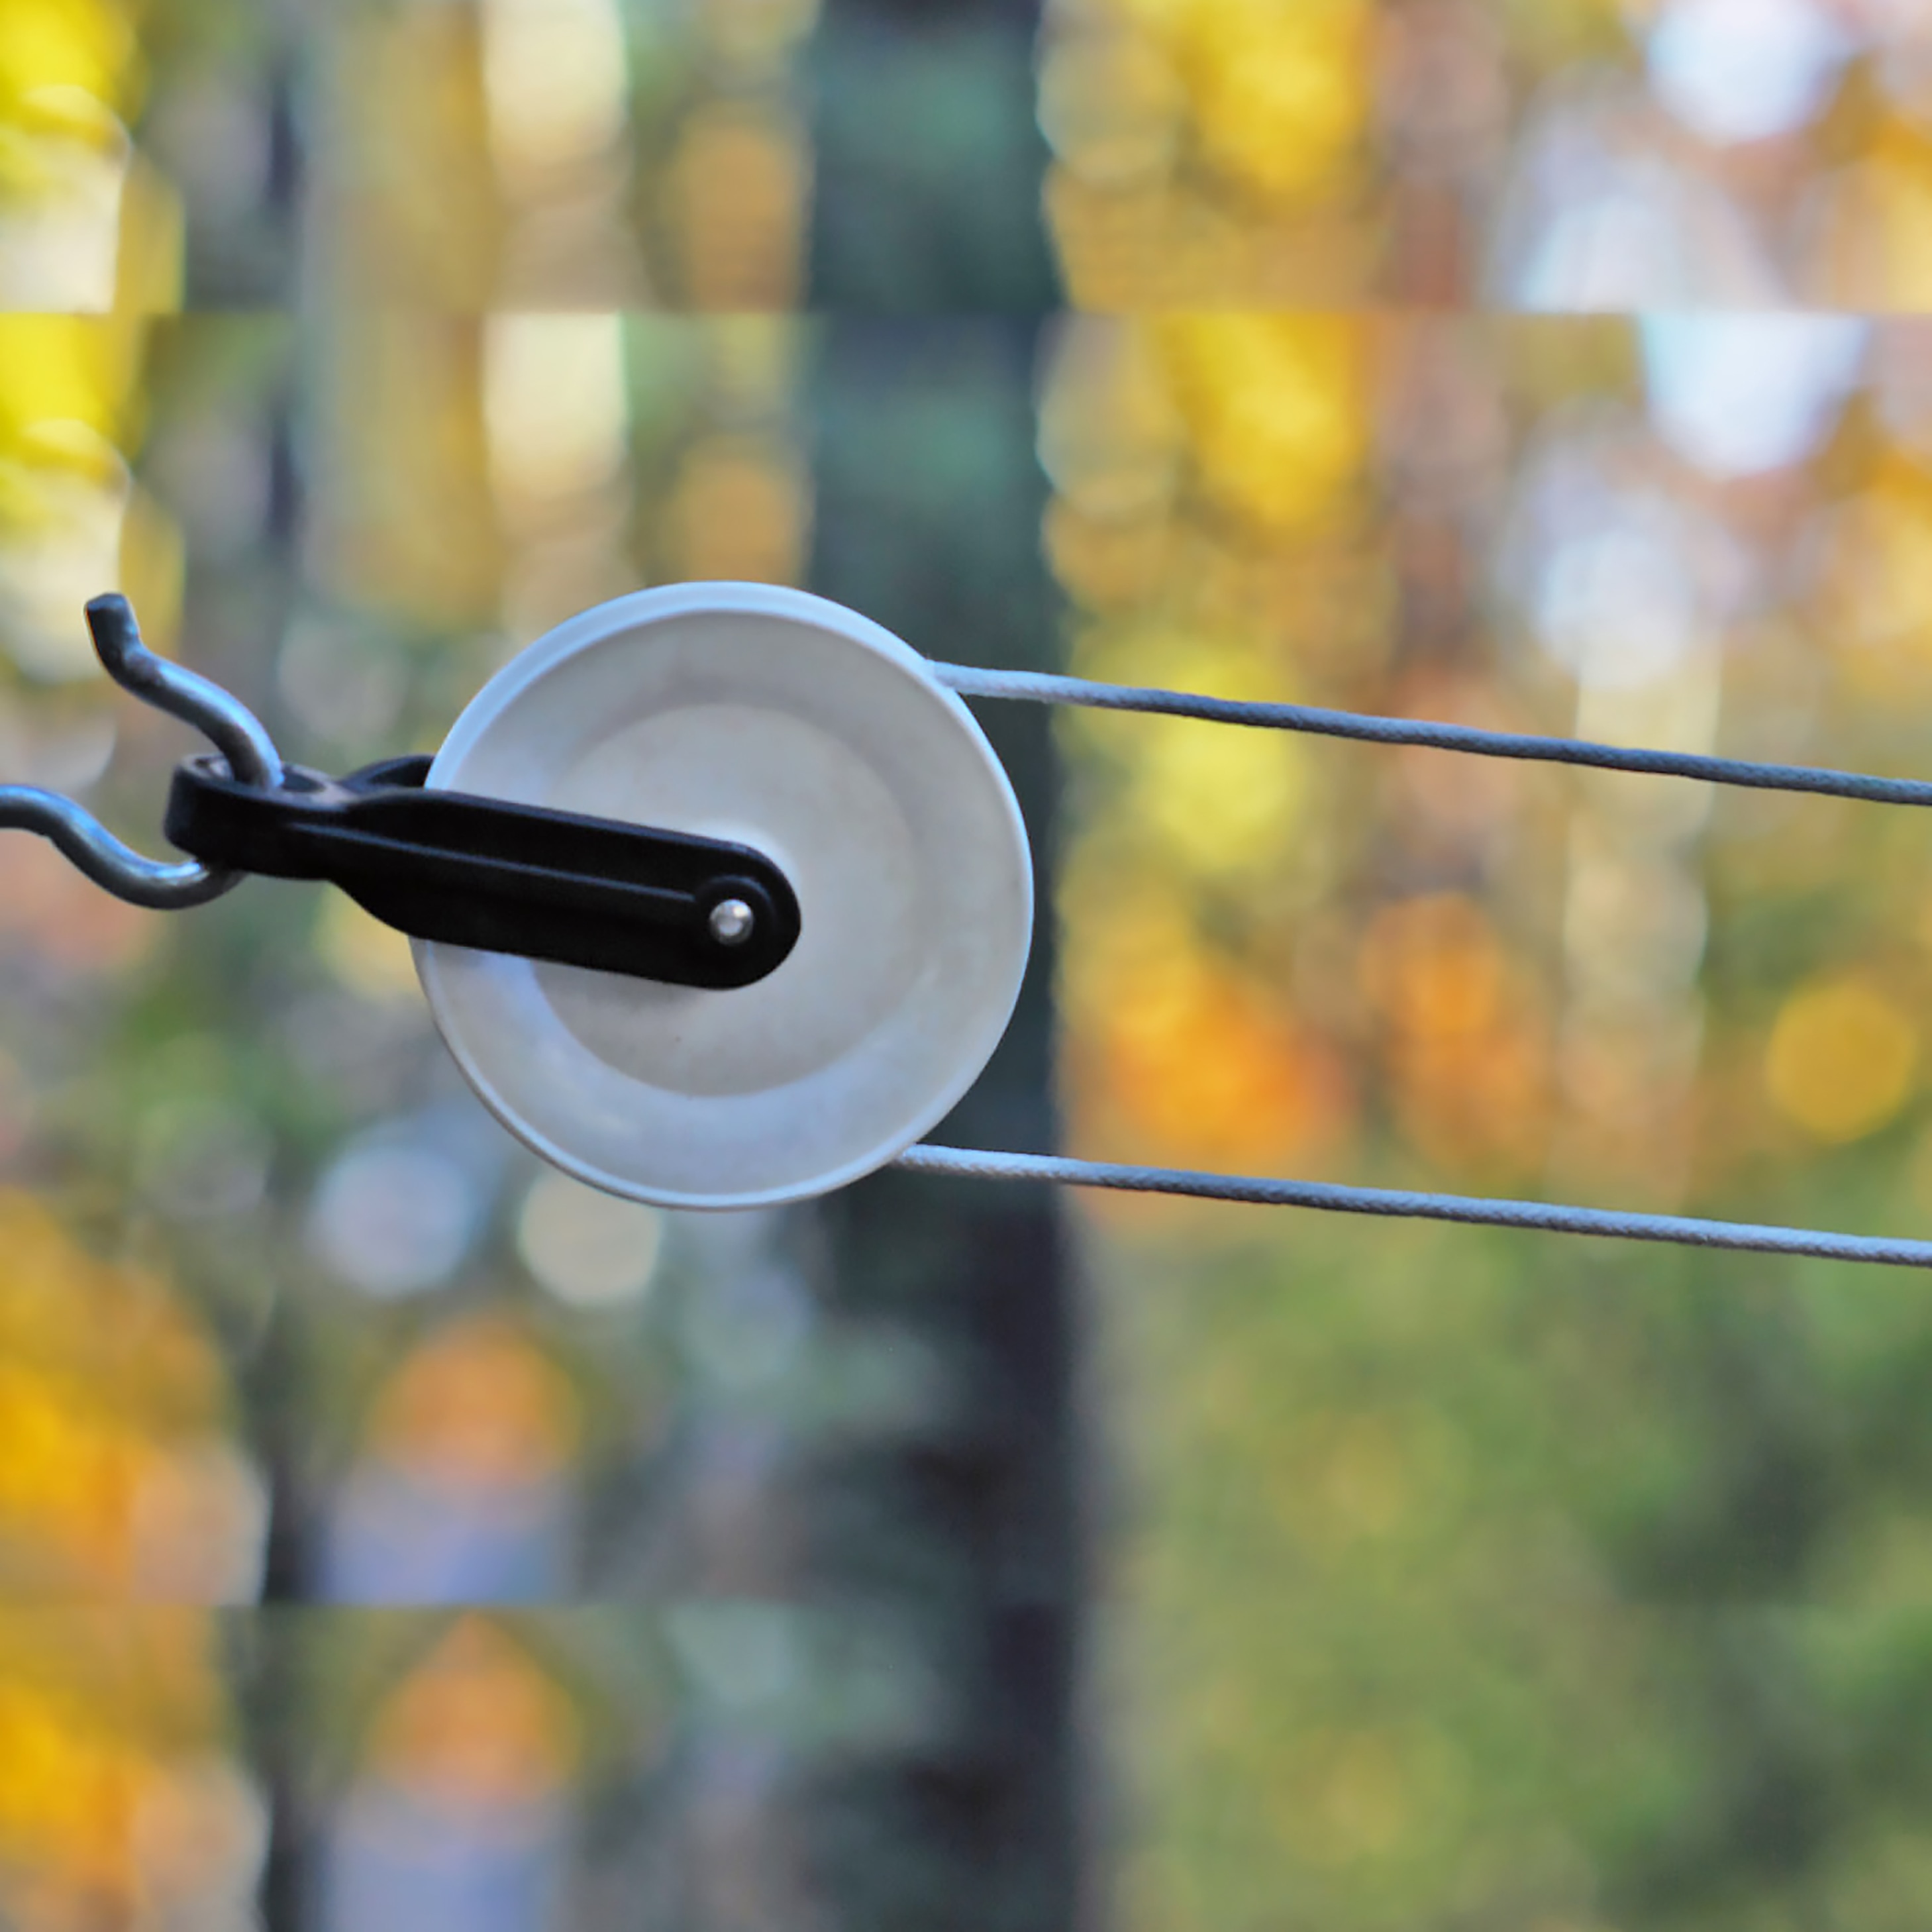 clothesline pulley